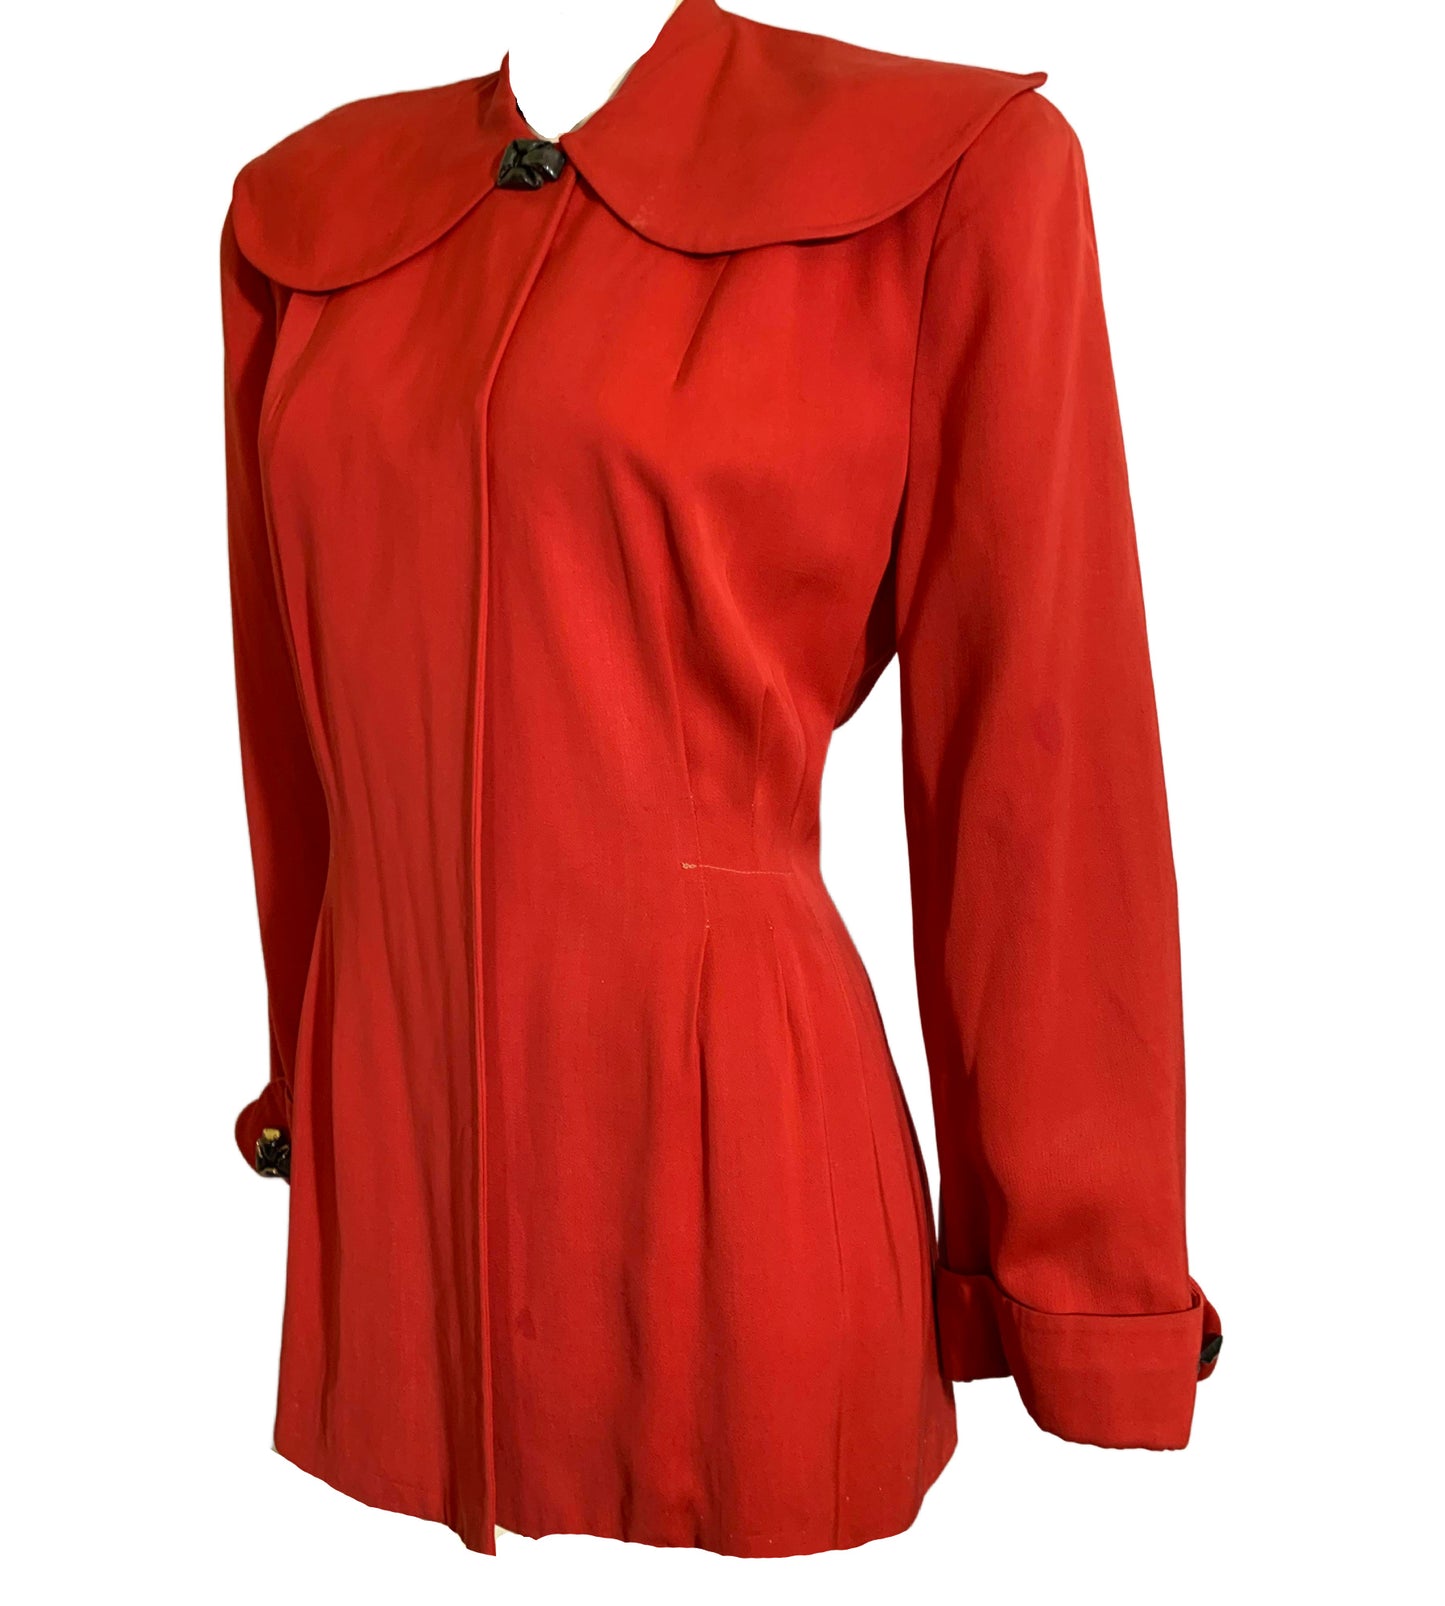 Apple Red Rayon Suit Jacket with Round Collar circa 1940s